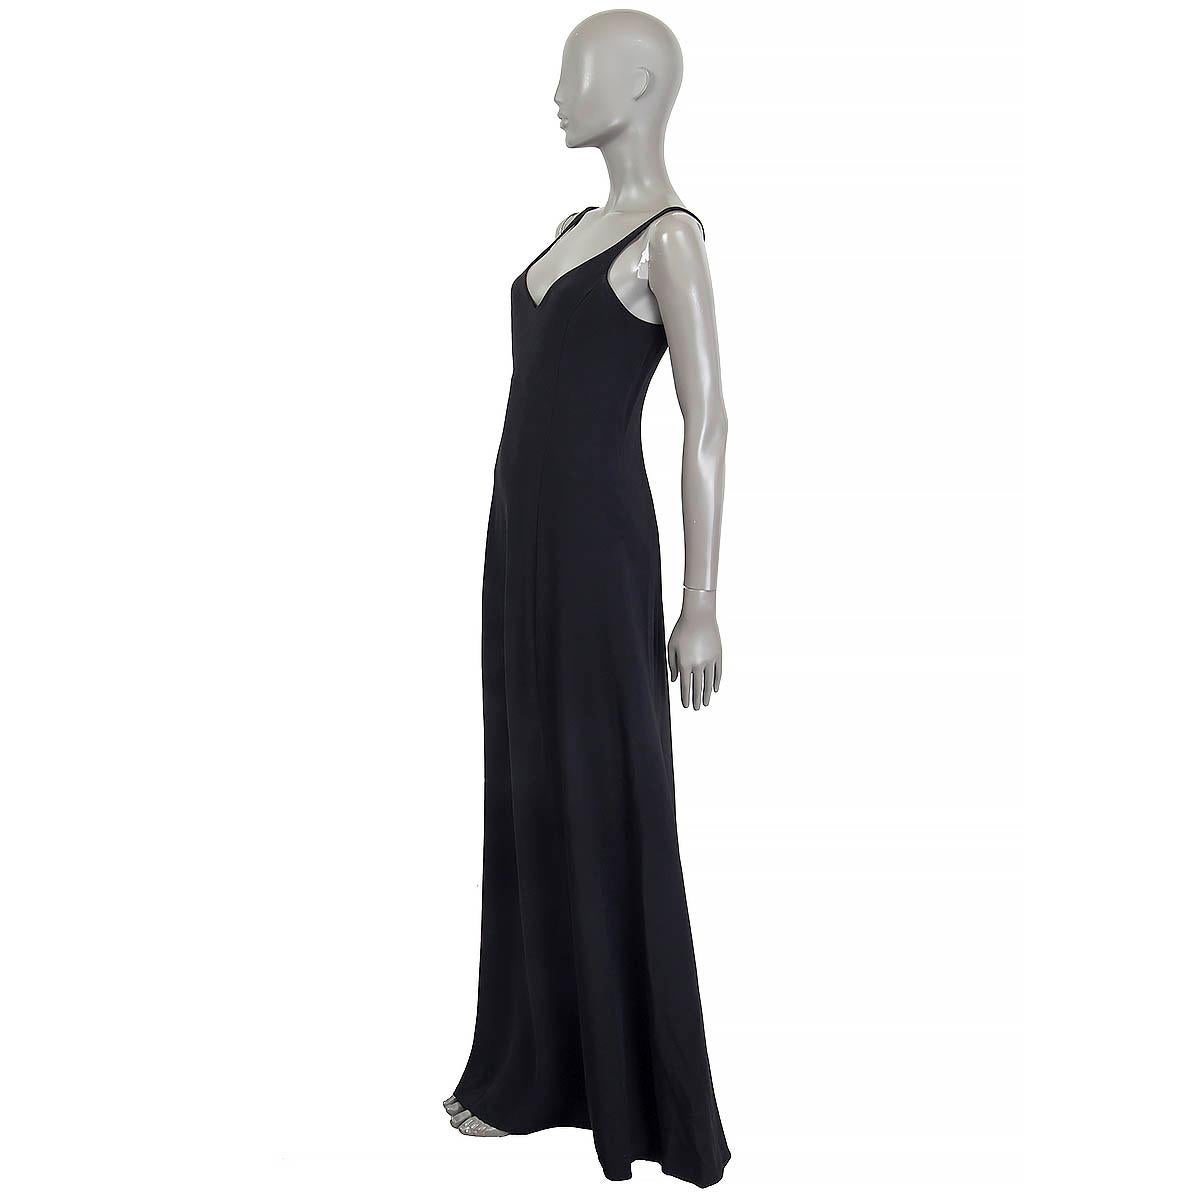 100% authentic The Row casual sleeveless maxi dress in black viscose (97%) and elastane (3%). Lined in black silk (100%). Has been worn and is in excellent condition.

Measurements
Tag Size	6
Size	S
Bust	90cm (35.1in) to 106cm (41.3in)
Waist	90cm